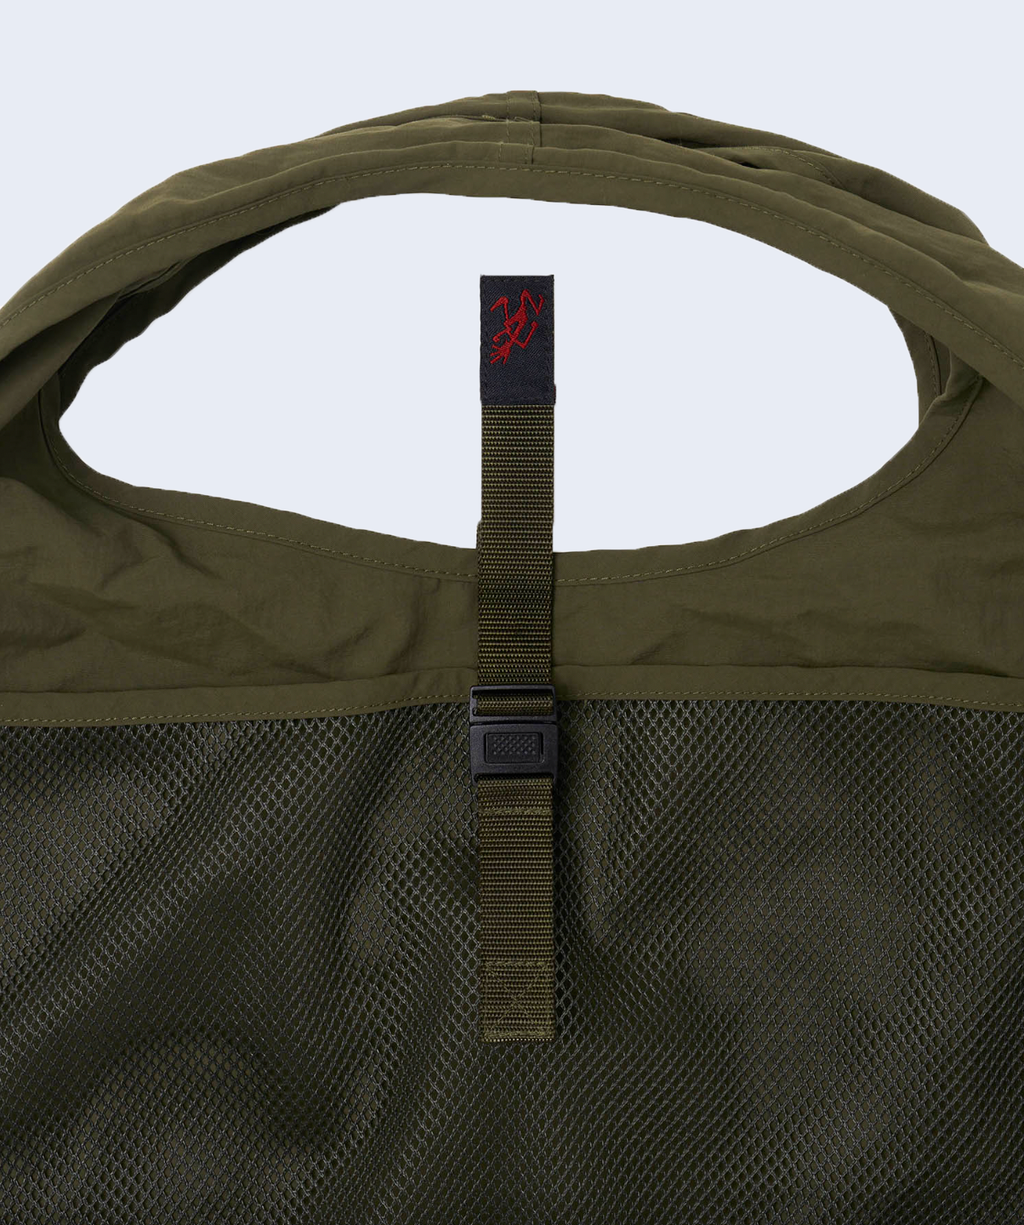 Daily Bag Deep Olive